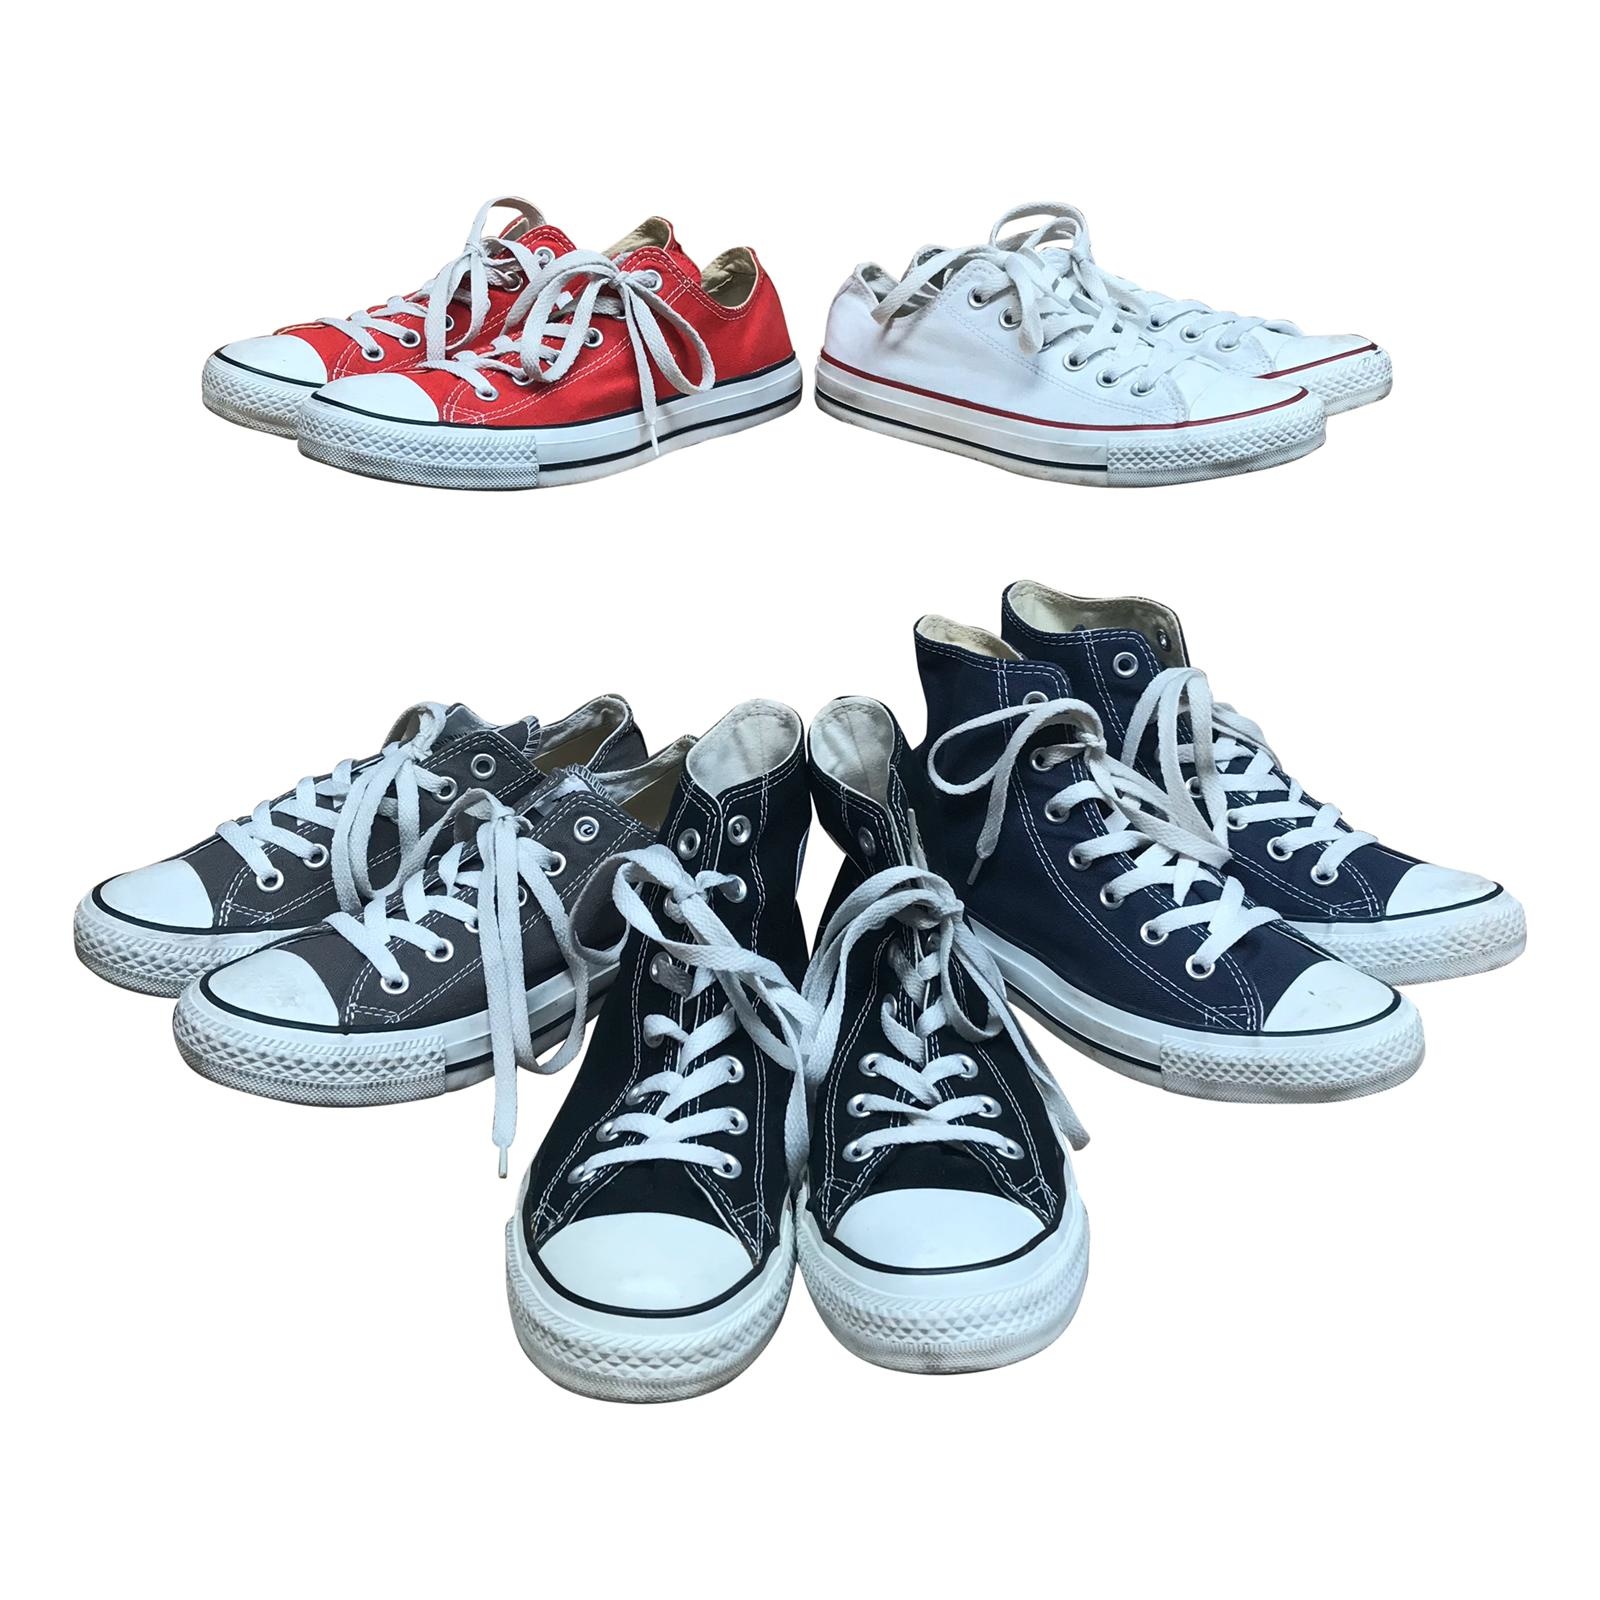 wholesale converse all star shoes